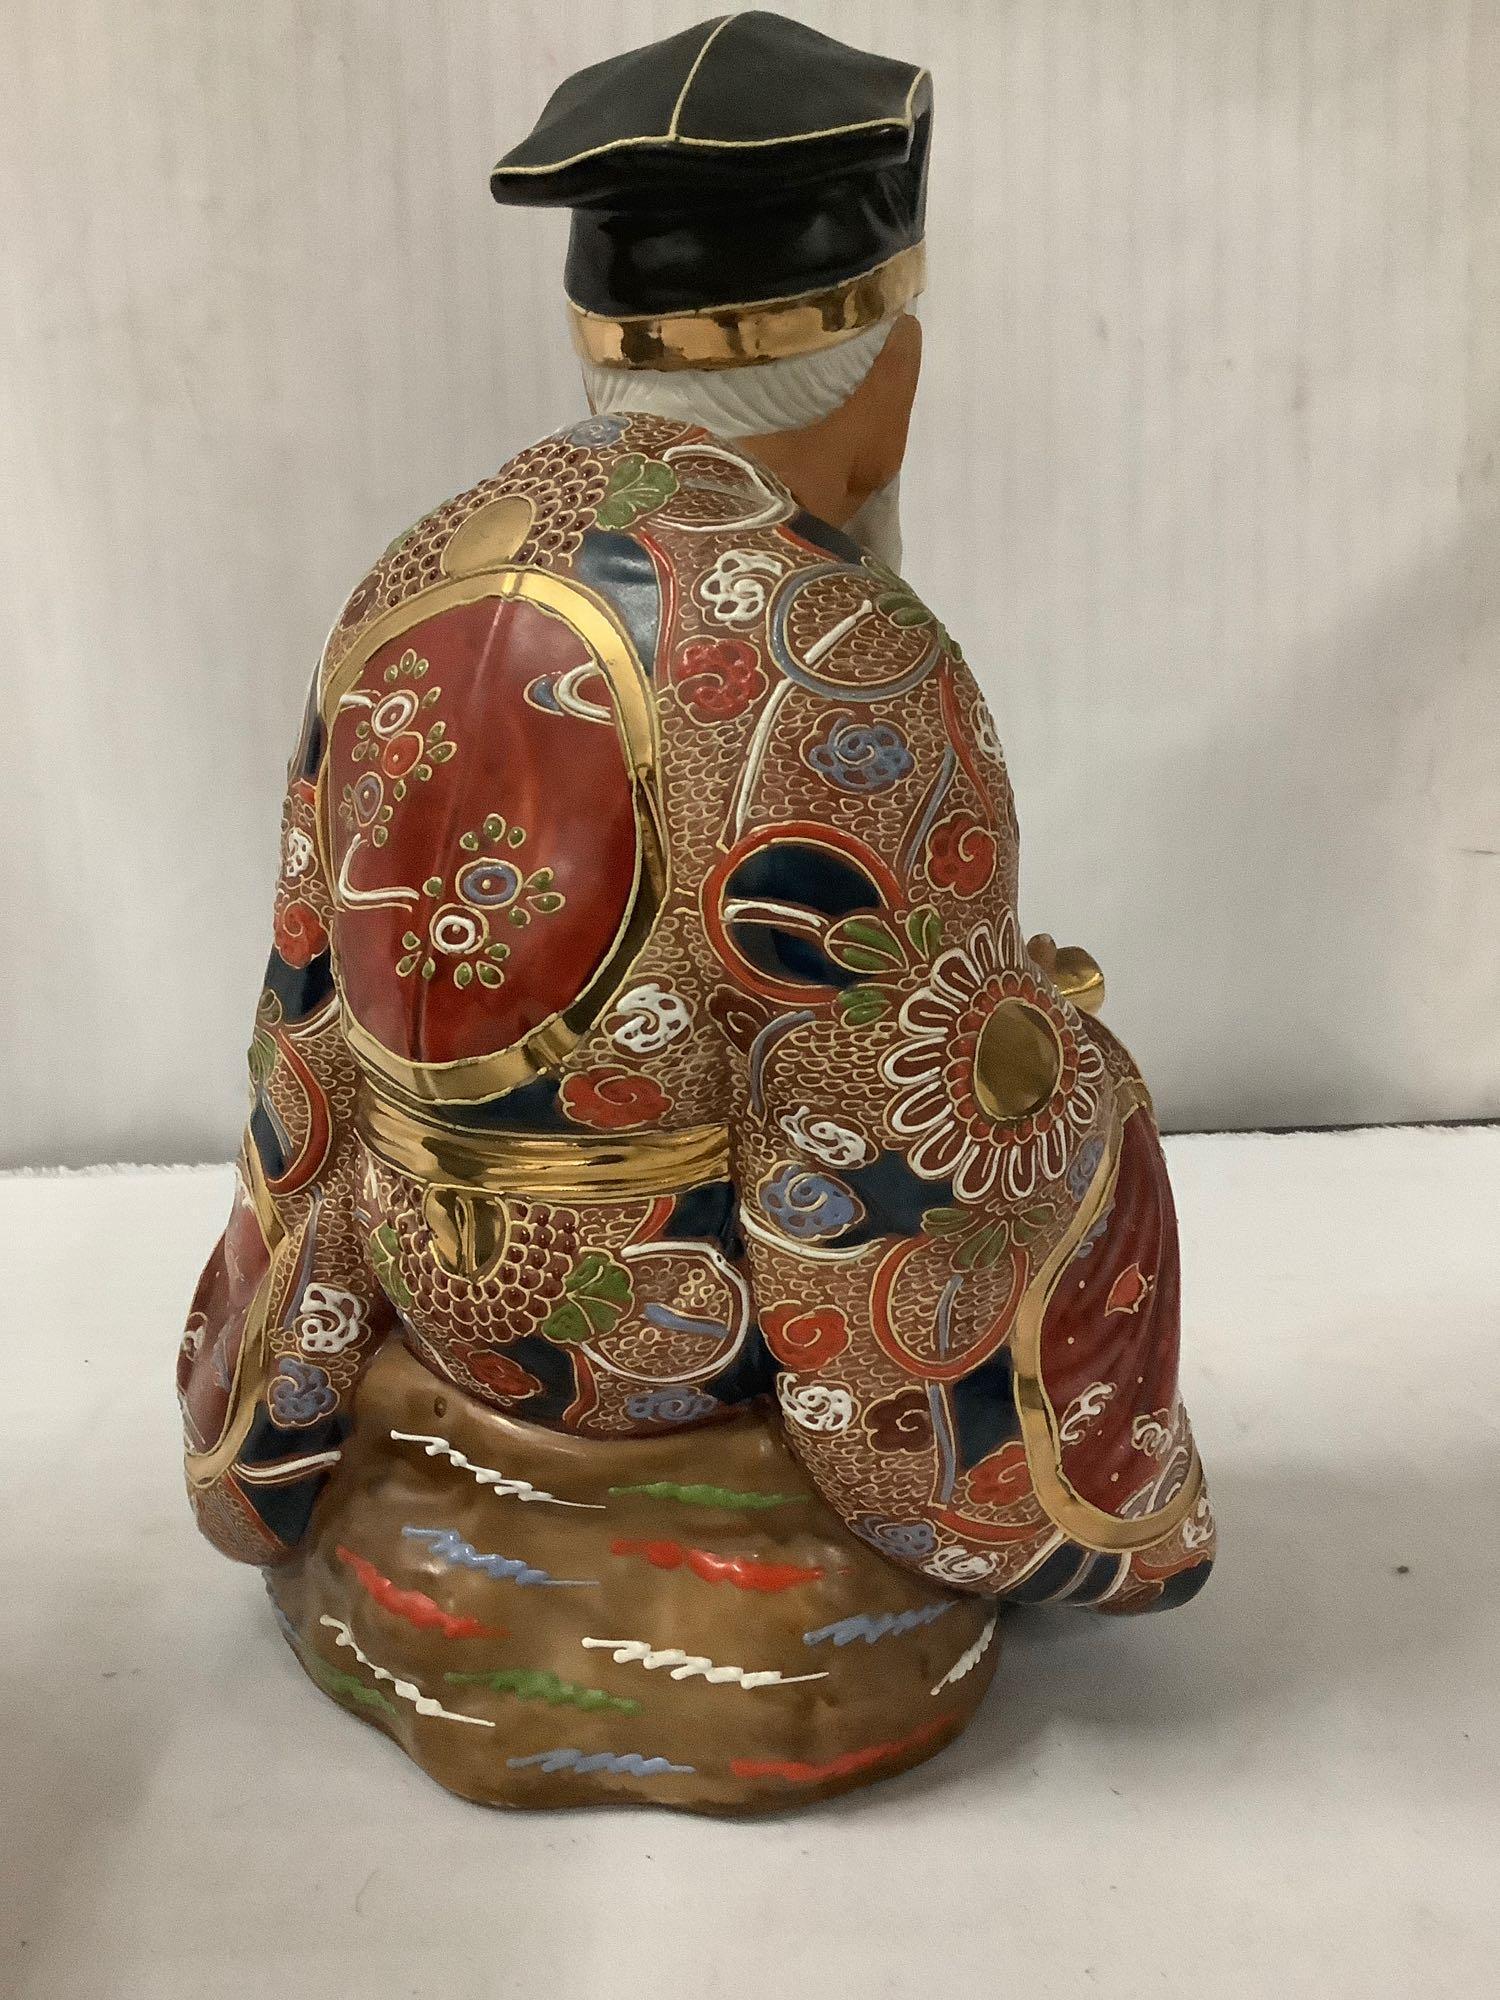 2 Asian Porcelain statues with bright colors - robed jubilant man (marked) + Imari painted elder